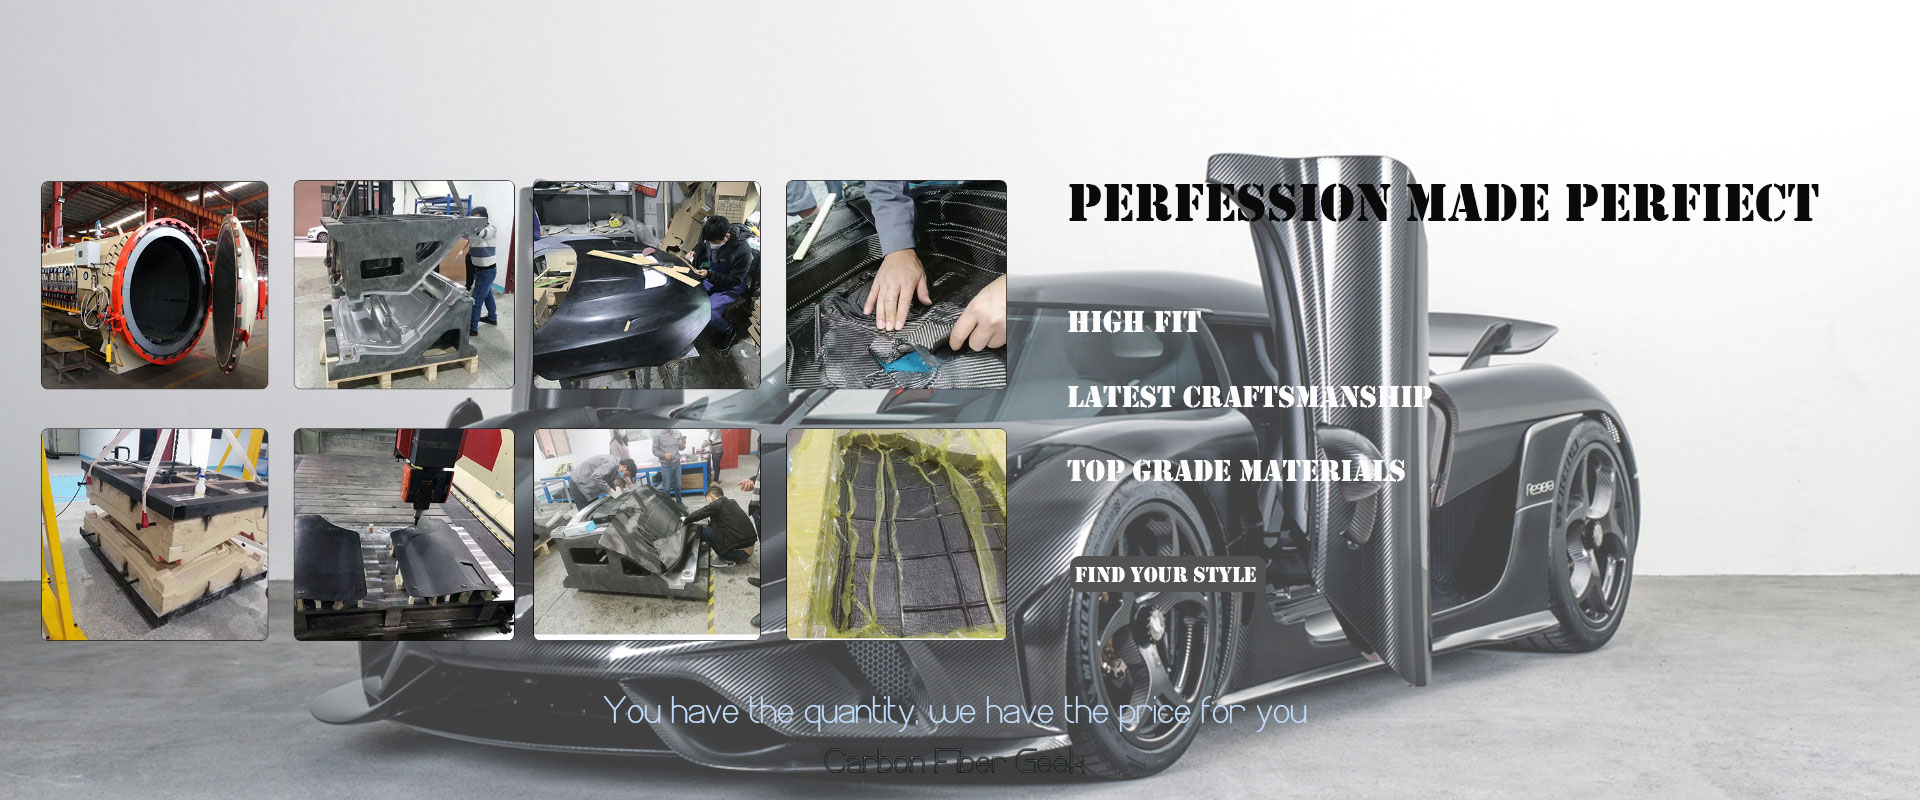 Carbon fiber geek-Perfession Made Perfect. You have the quantity, We have the price for you.